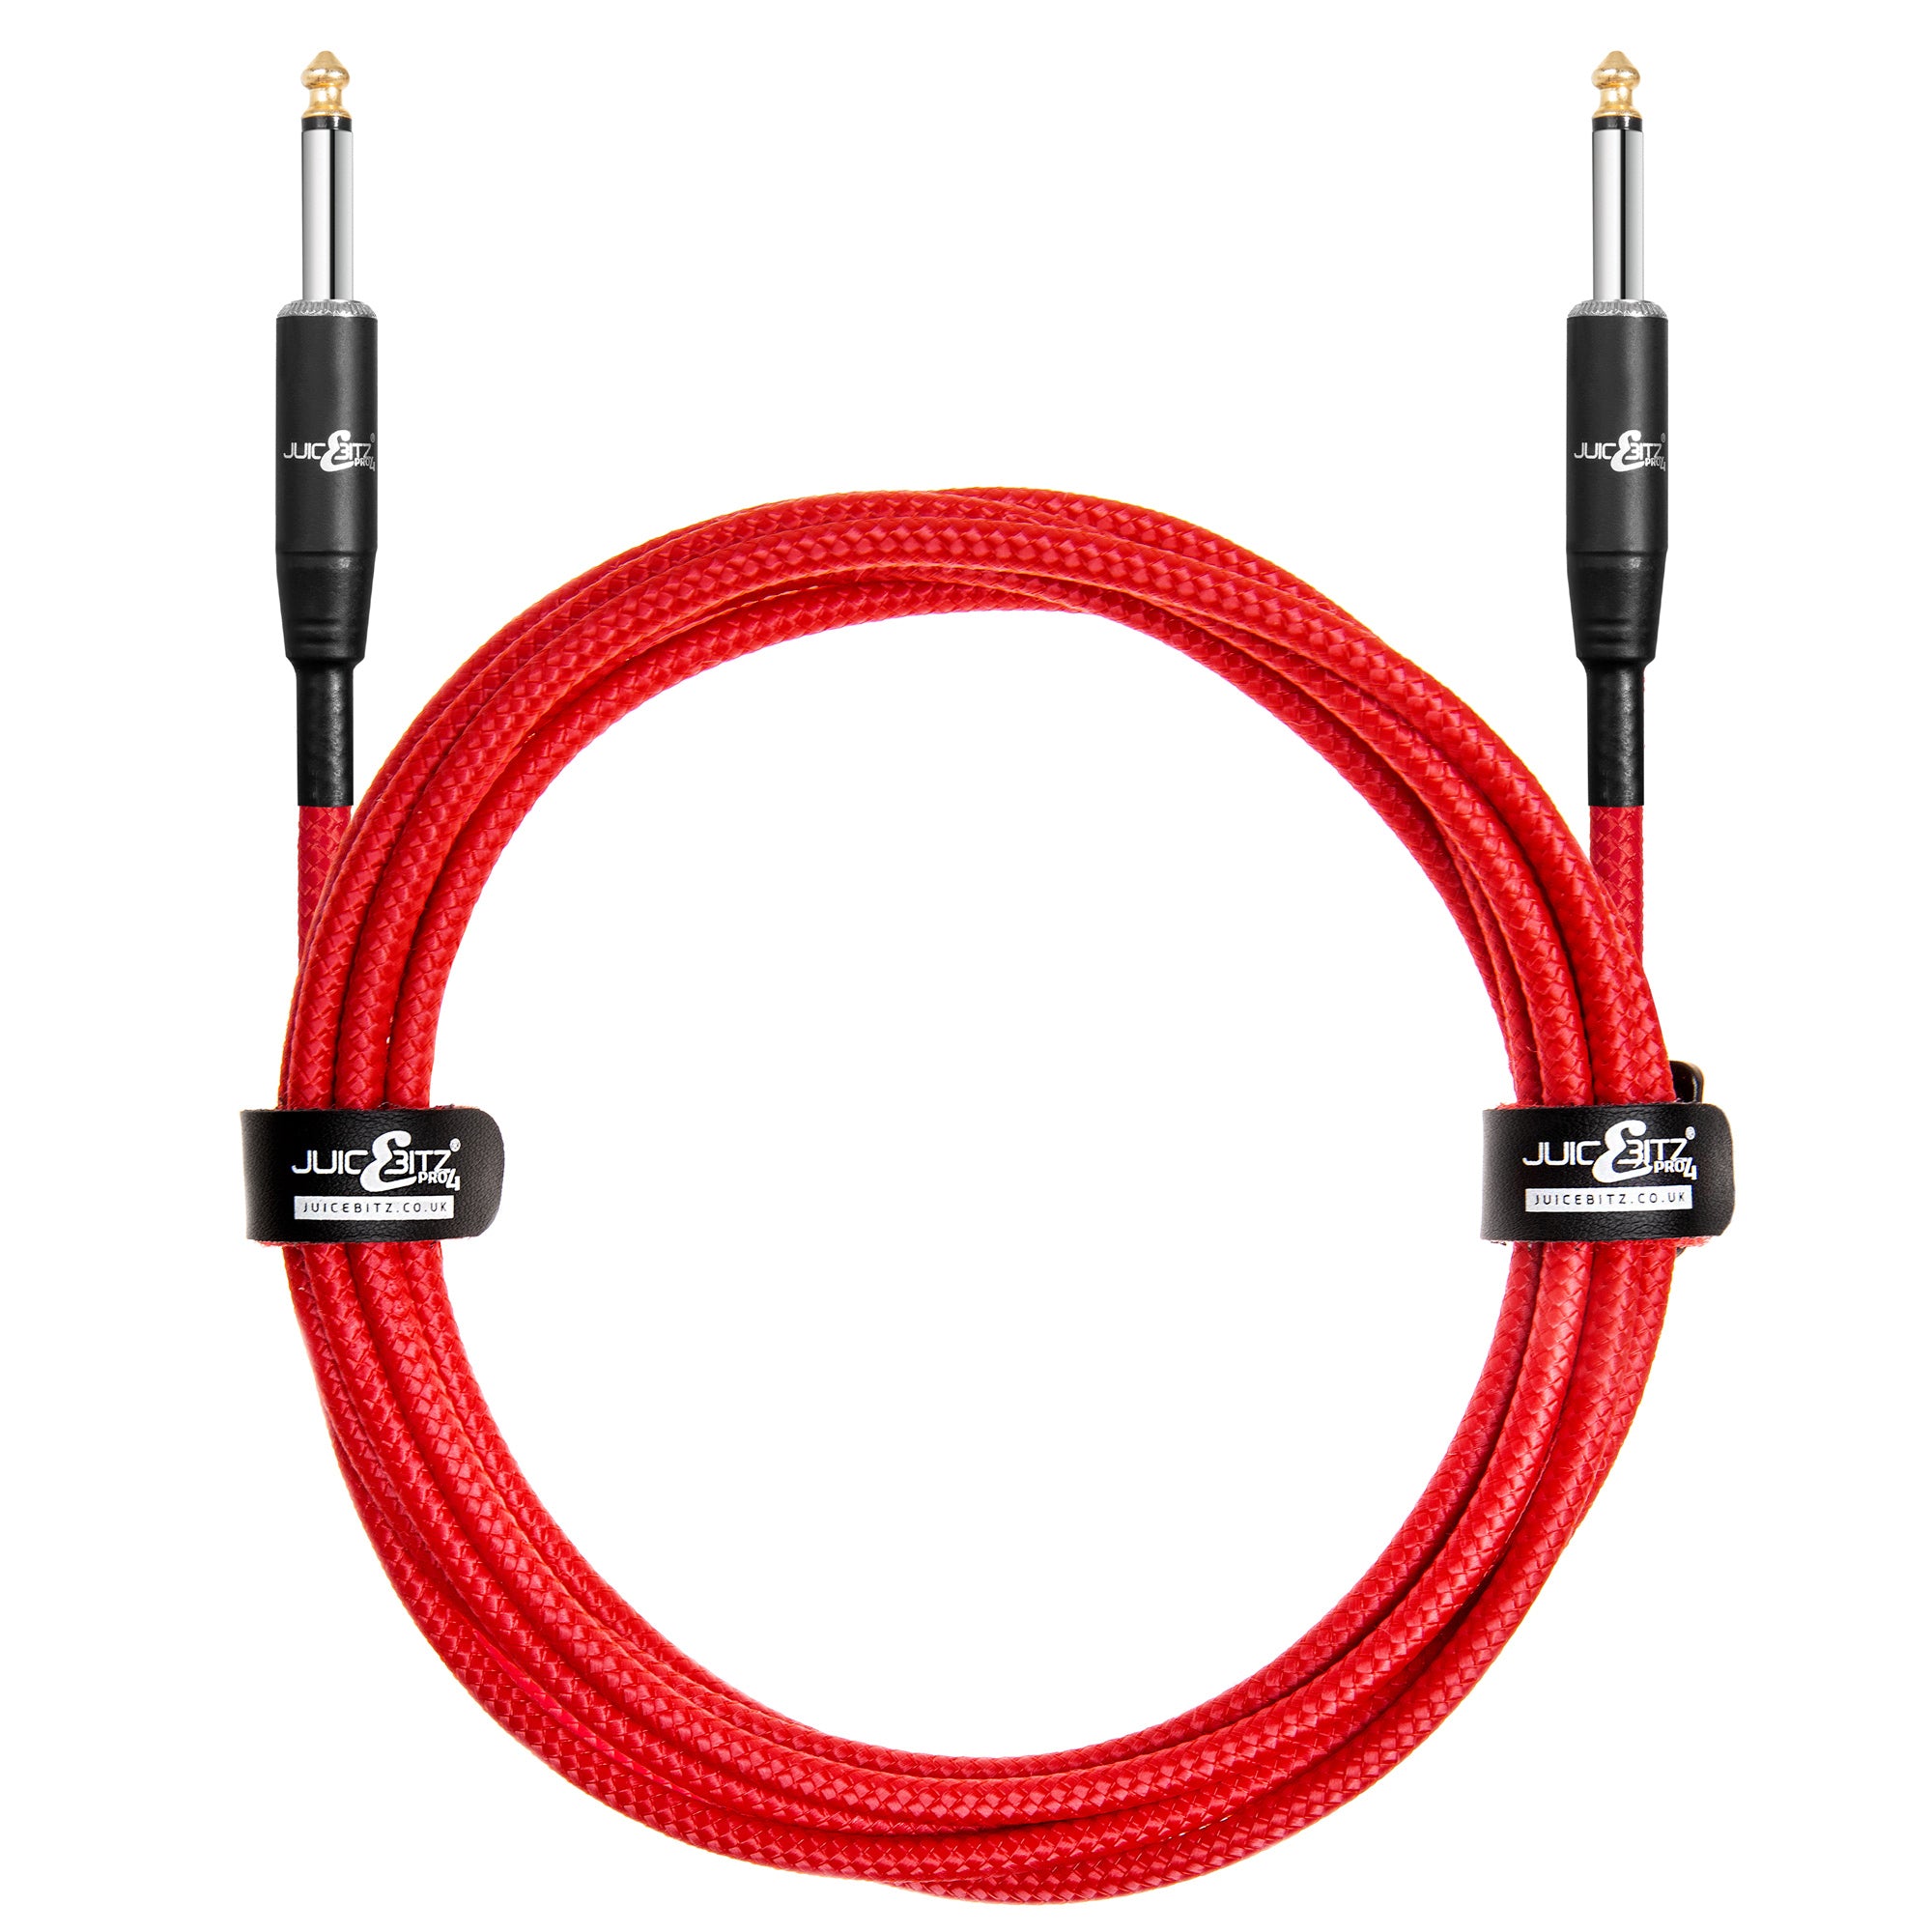 PRO Series Braided Guitar Cable 1/4" Straight Jack to Jack 6.35mm Lead - Red